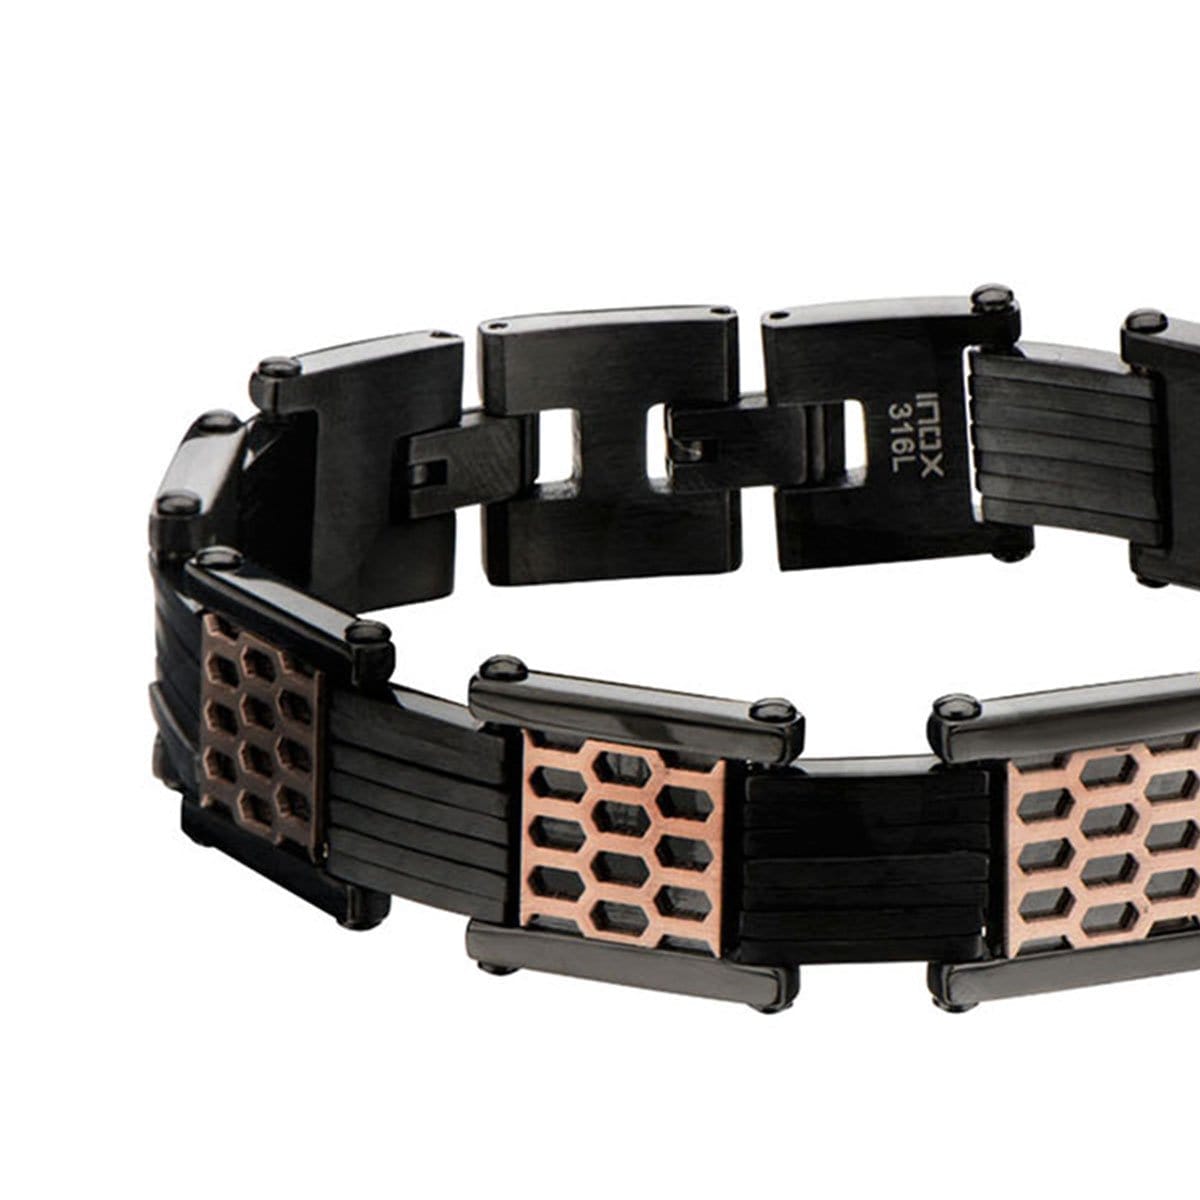 INOX JEWELRY Bracelets Black and Rose Tone Stainless Steel Car Grille Link Bracelet BR14442